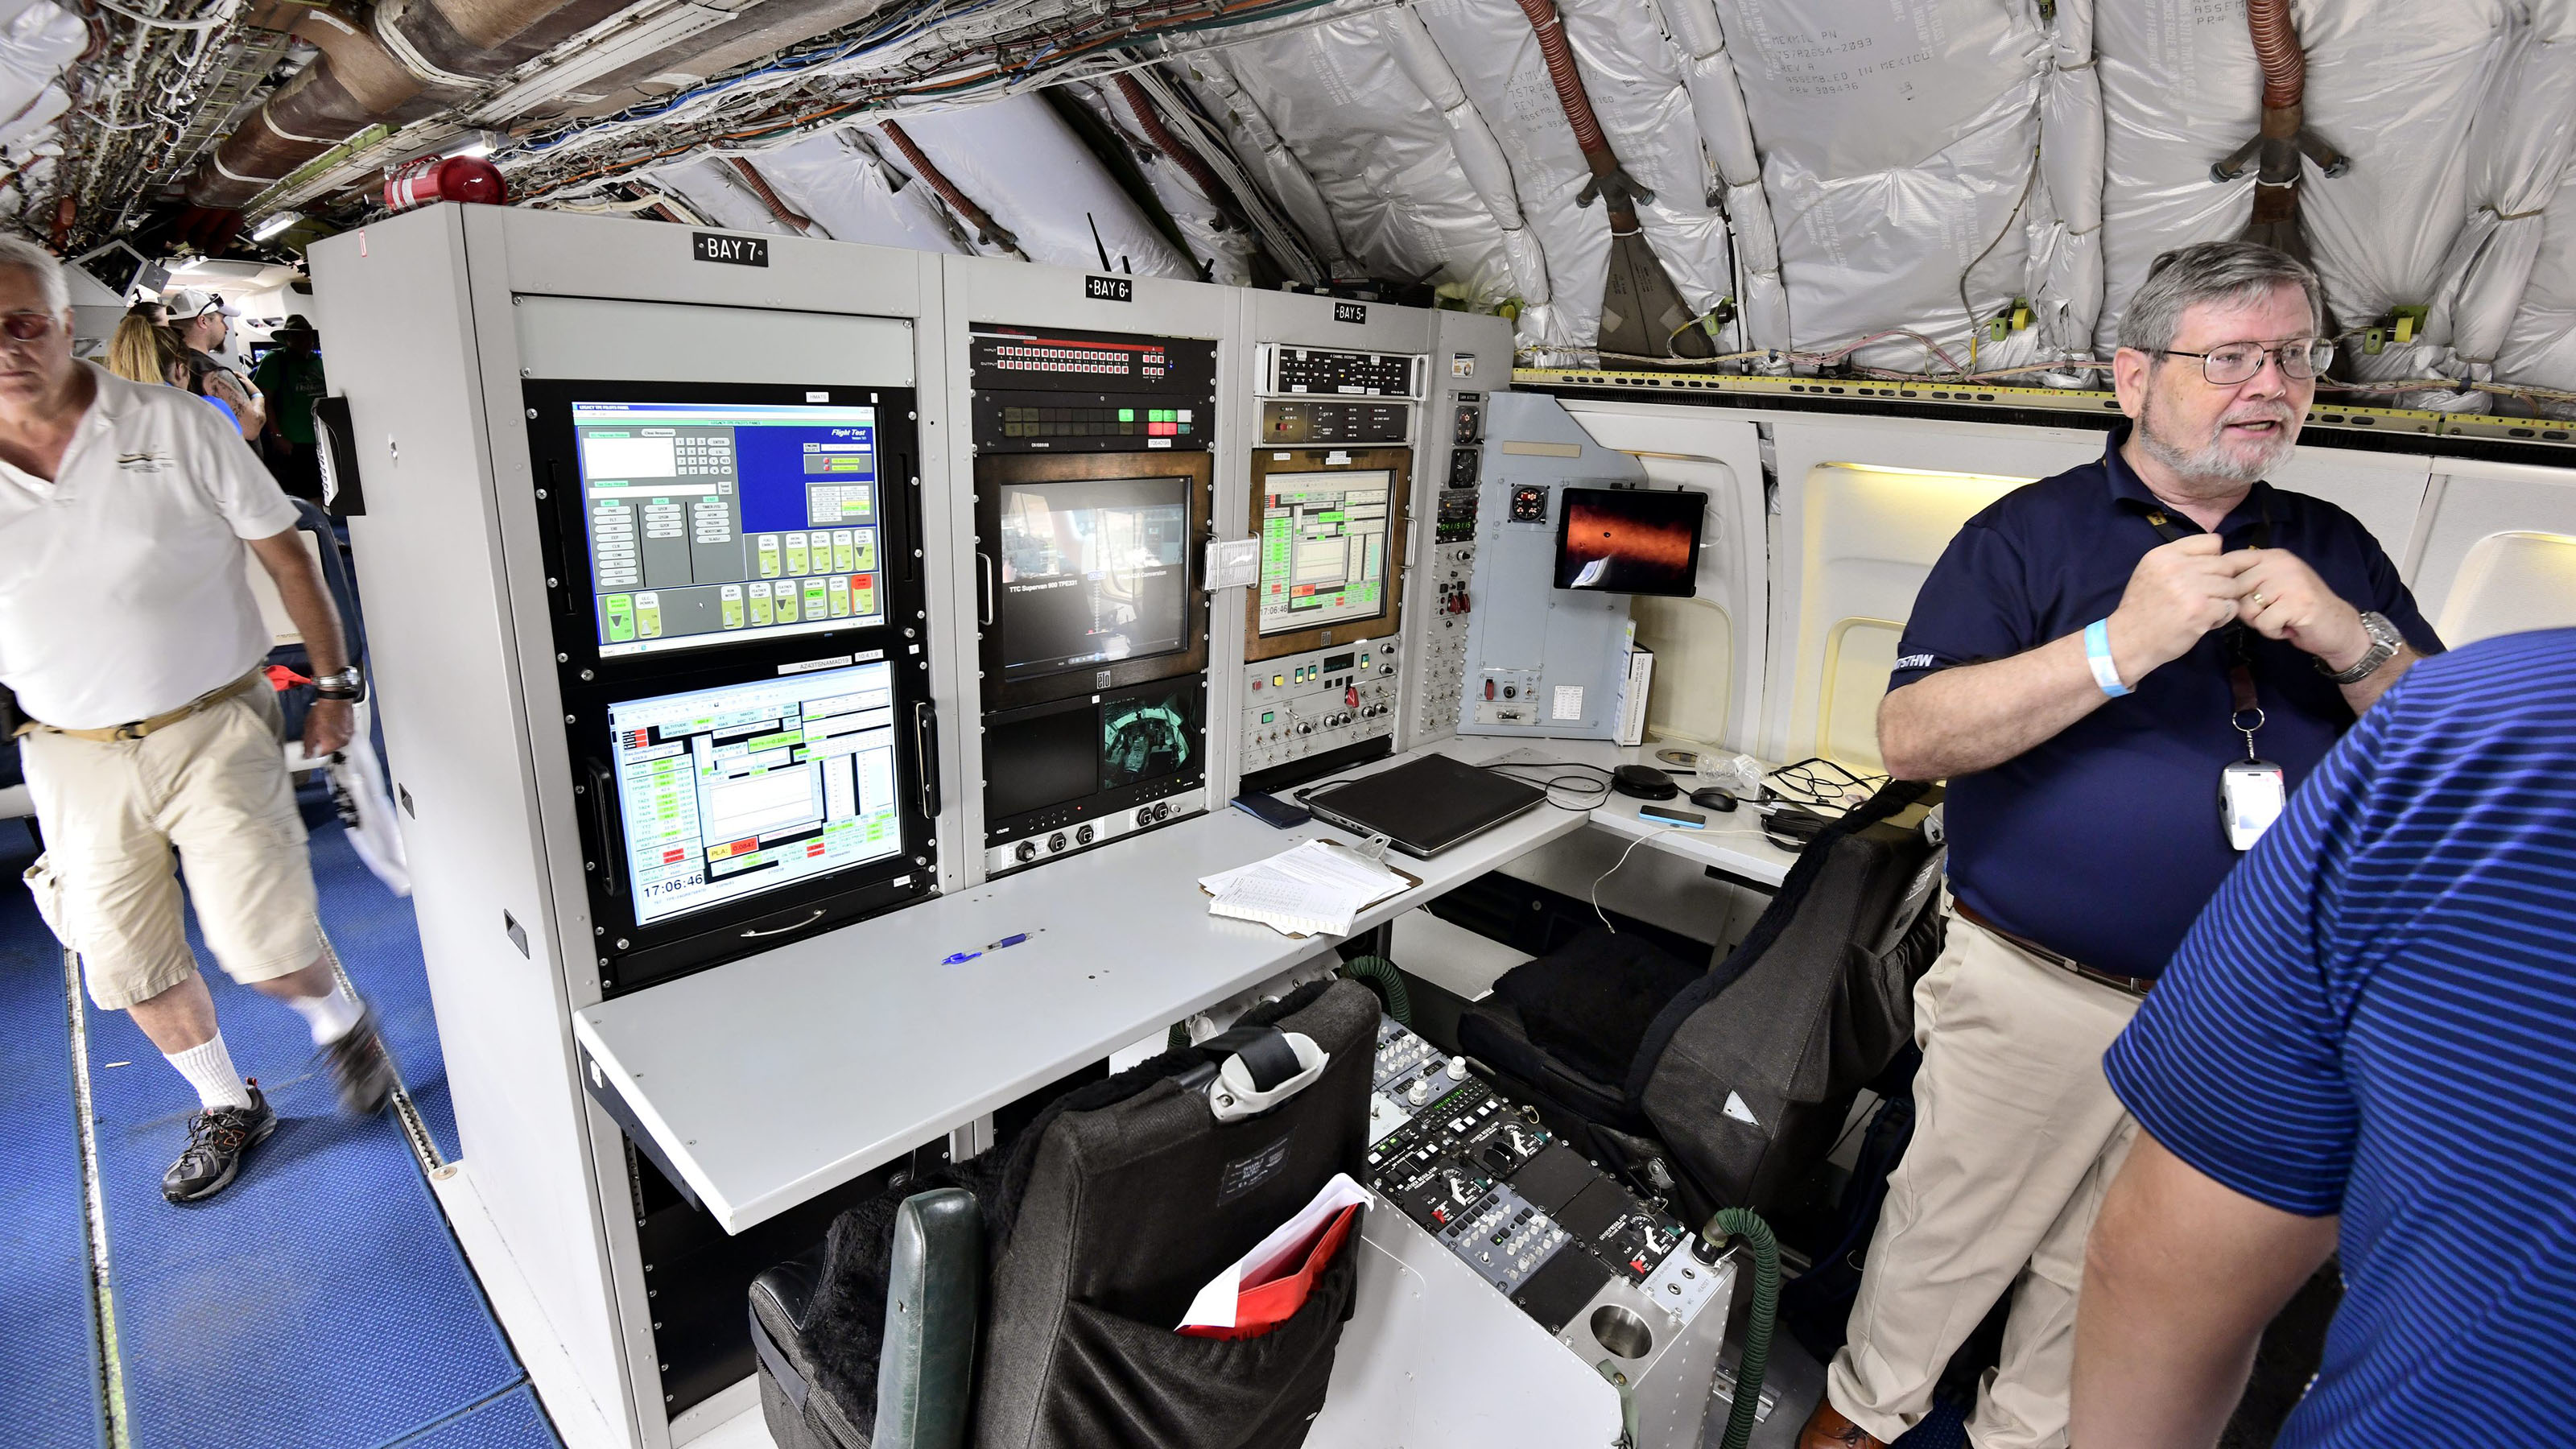 These engineer work stations are located in the cabin of Honeywell's Boeing 757 test bed. Photo by Mike Collins.